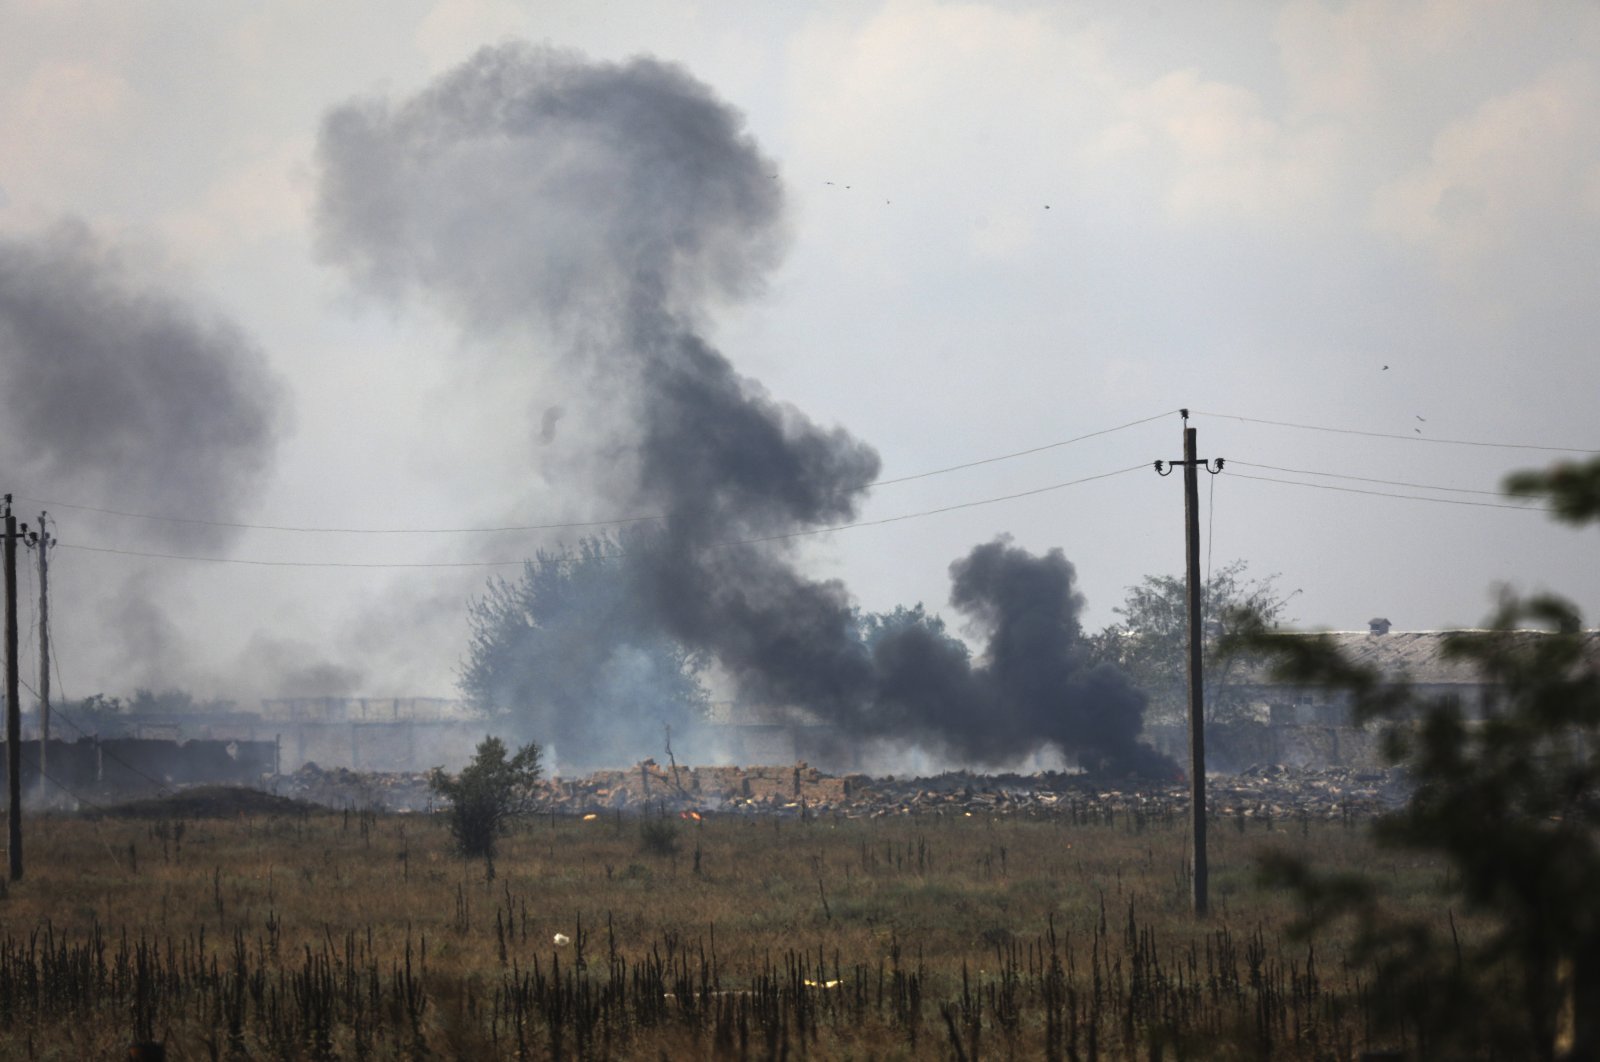 Smoke rises over the site of an explosion at a Russian ammunition storage facility near the village of Mayskoye, Crimea, Aug. 16, 2022. (AP Photo)